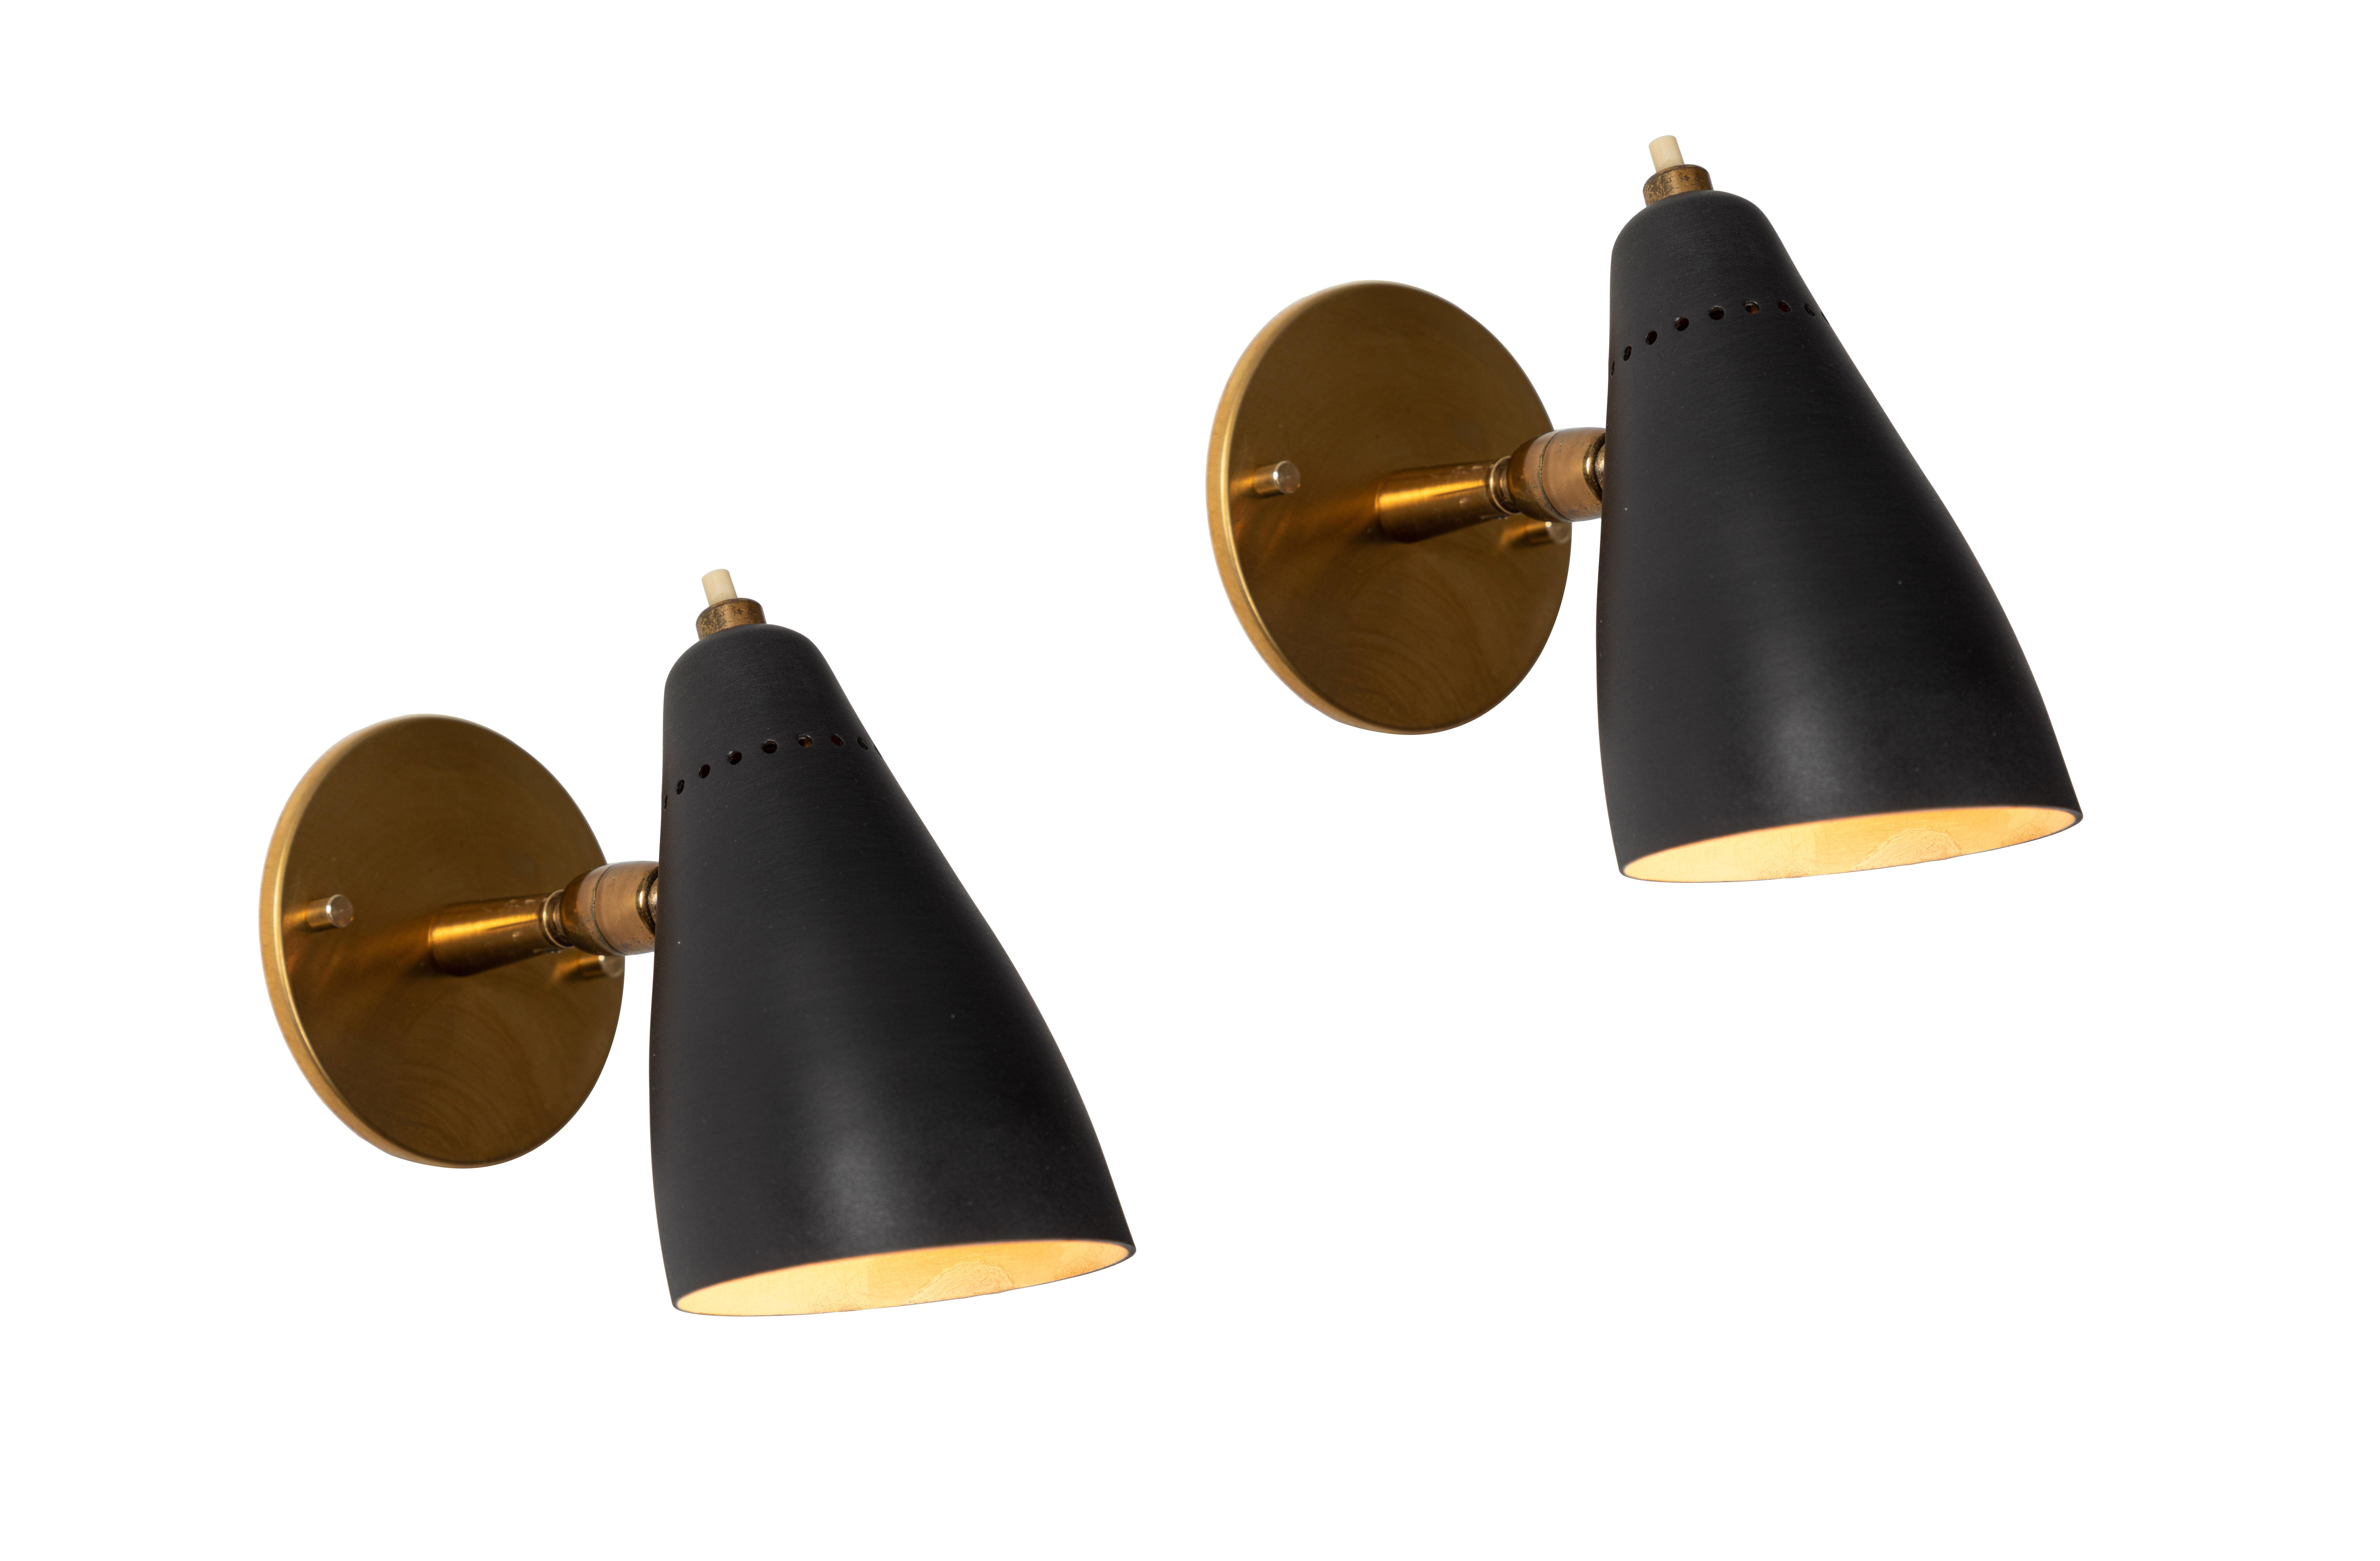 1950s Giuseppe Ostuni articulating sconces for O-Luce. Executed in brass and black painted aluminum with perforated shade. Sconces pivot up/down and left/right on two separate ball joints. Original on/off switch on top of lamp. Wired for US